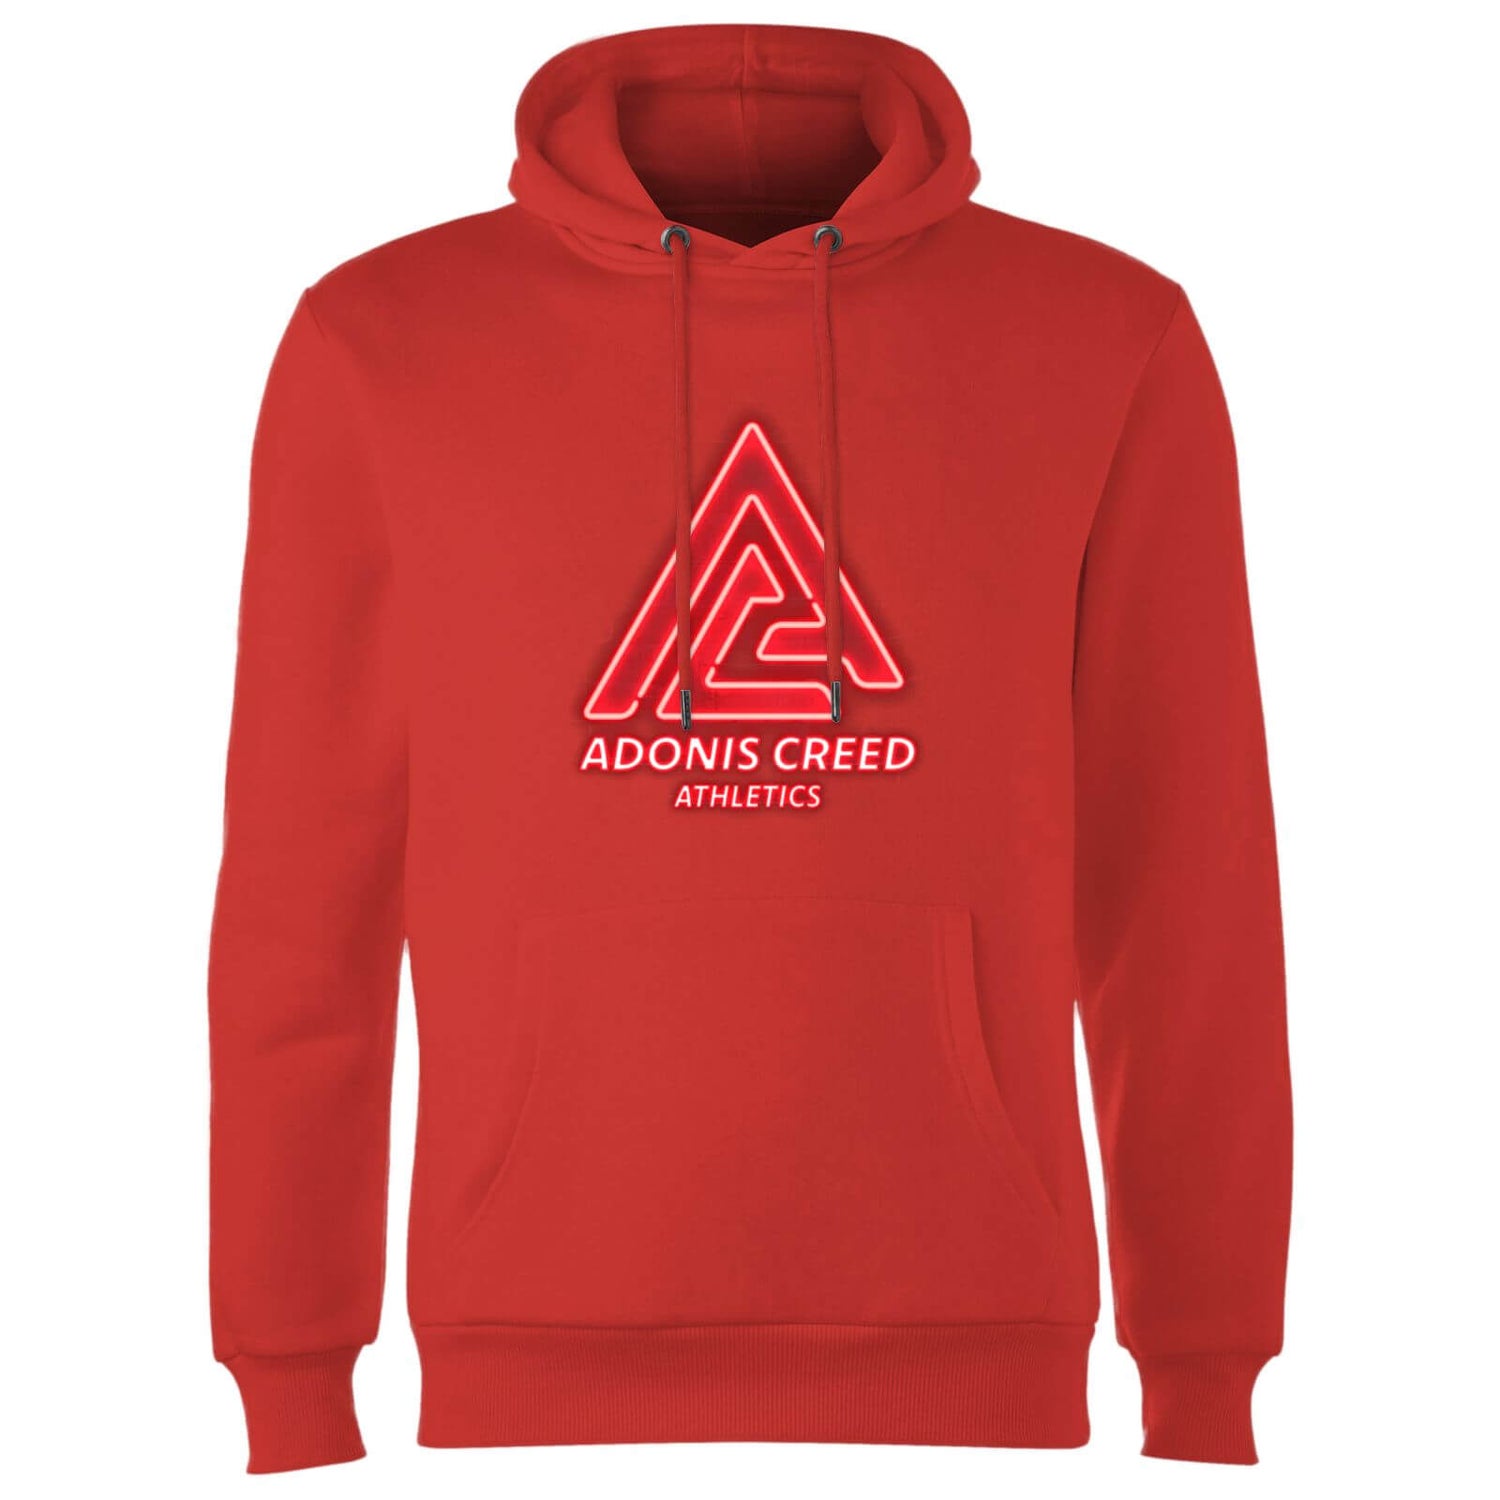 Creed Adonis Creed Athletics Neon Sign Hoodie - Red - S